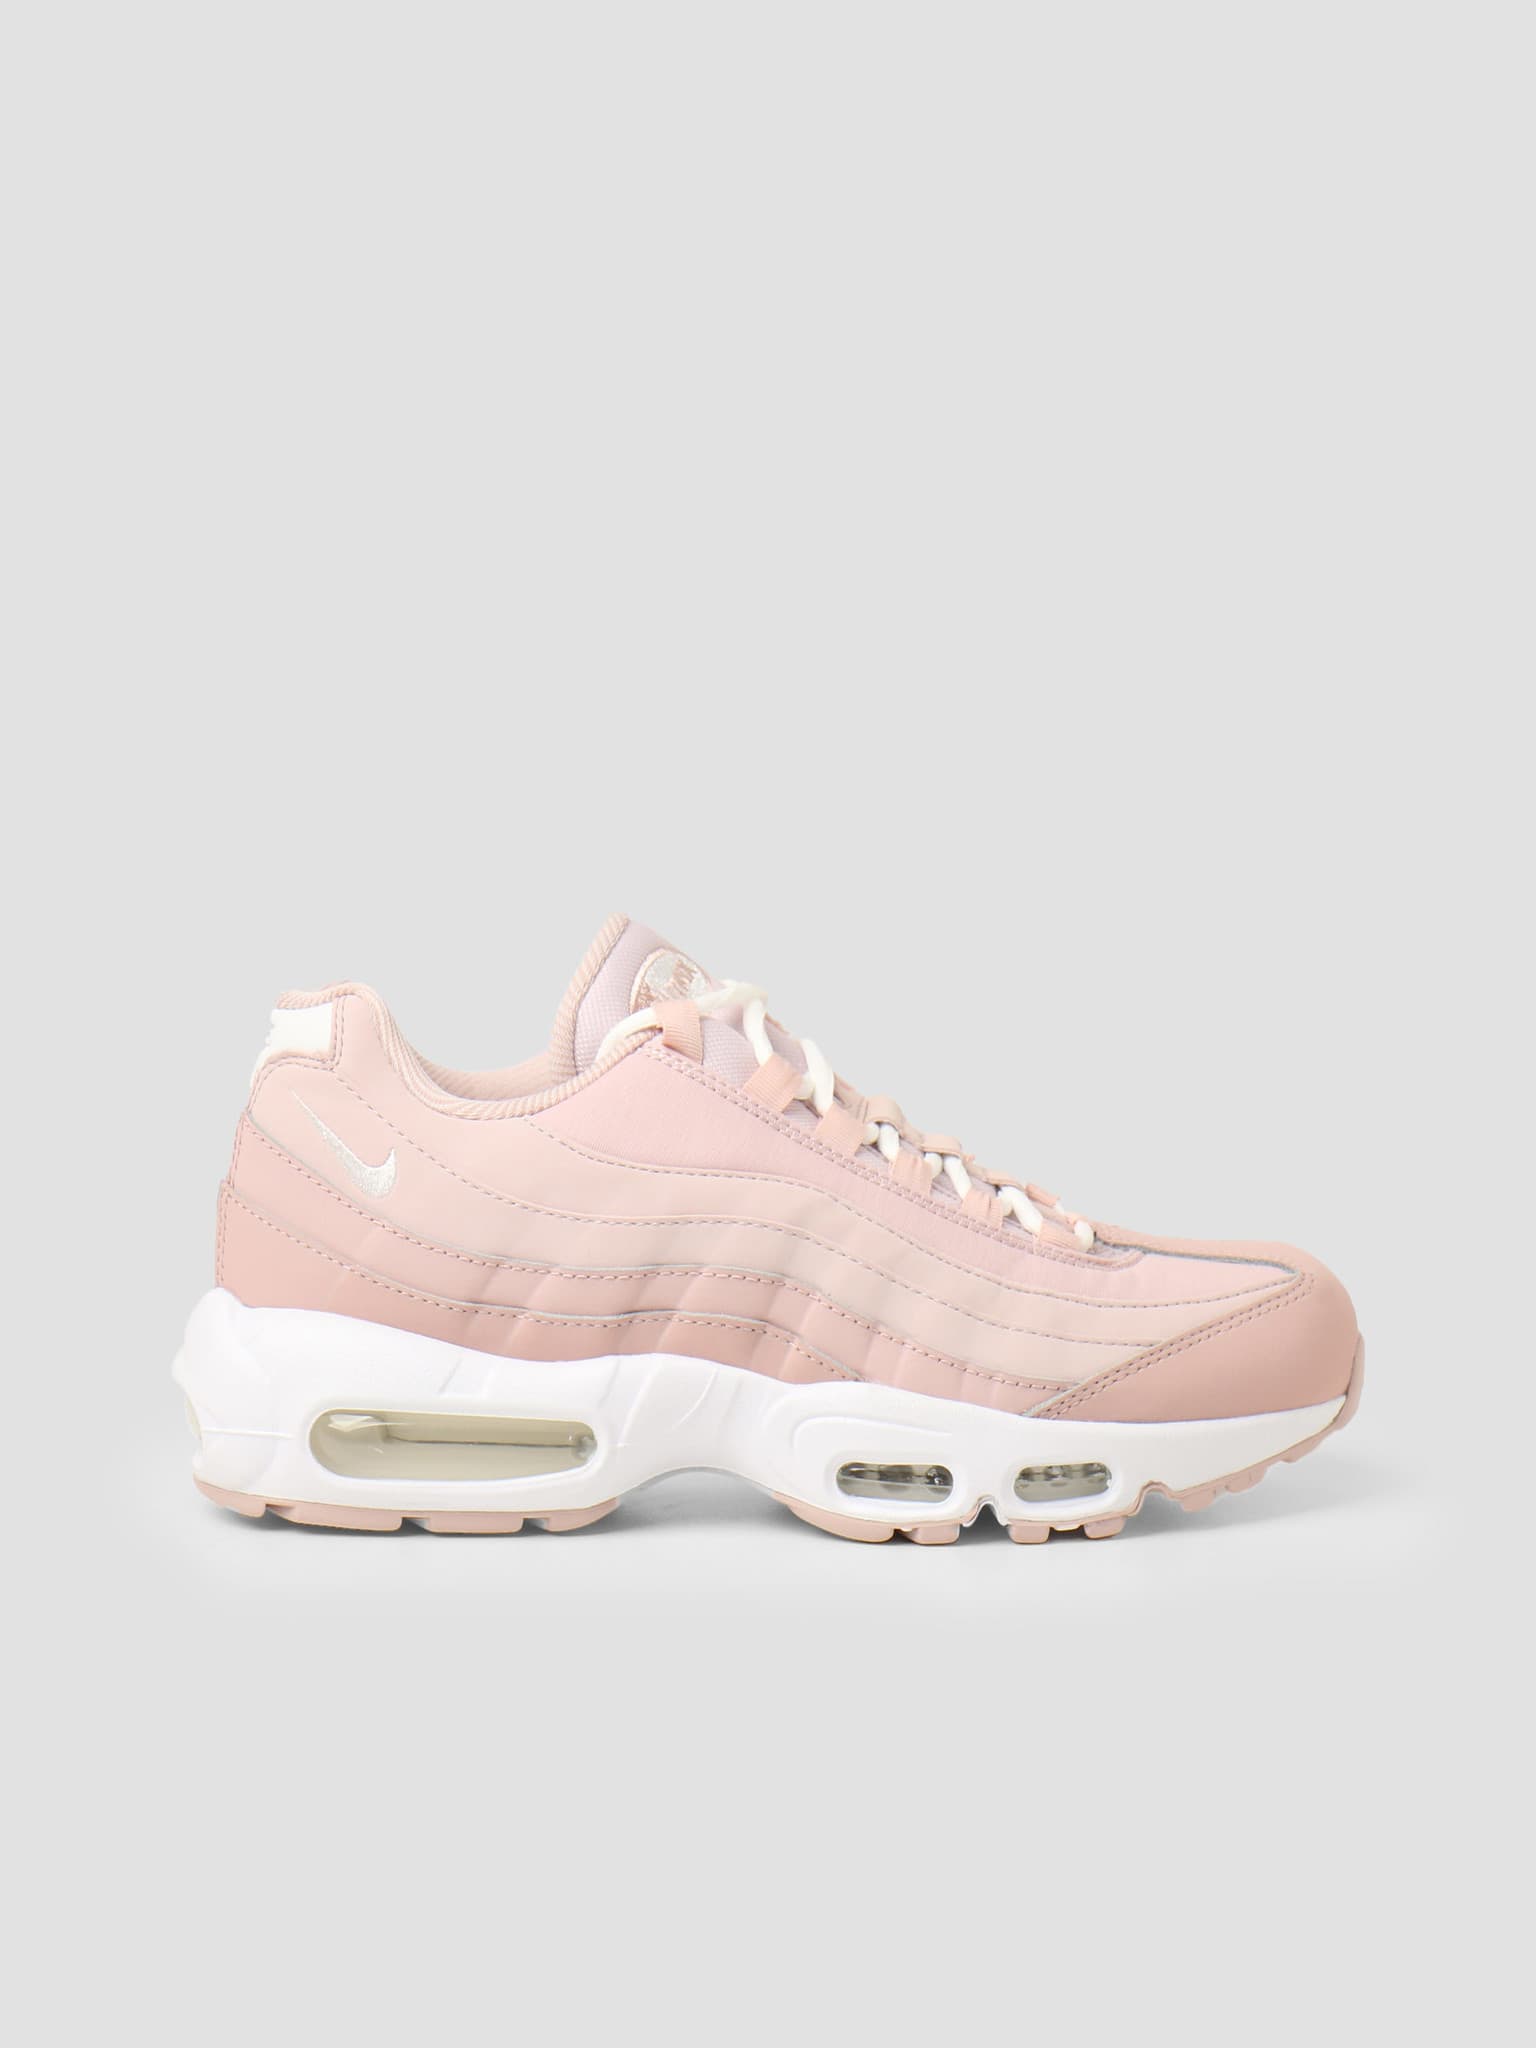 W Air Max 95 Pink Oxford Summit White Barely Rose DJ3859-600